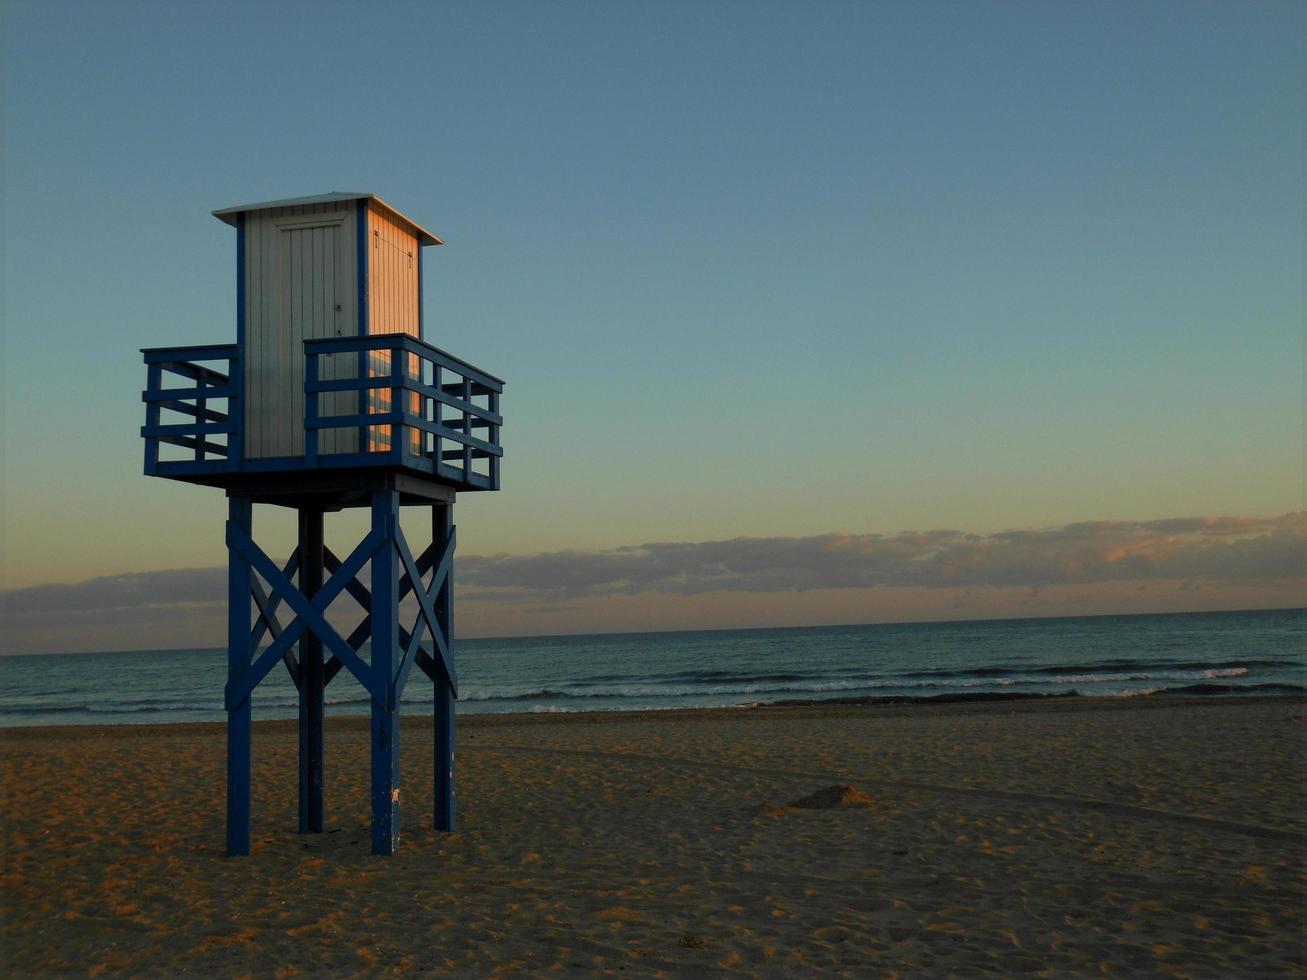 Watchtower at sunset on the shore of the beach. photo